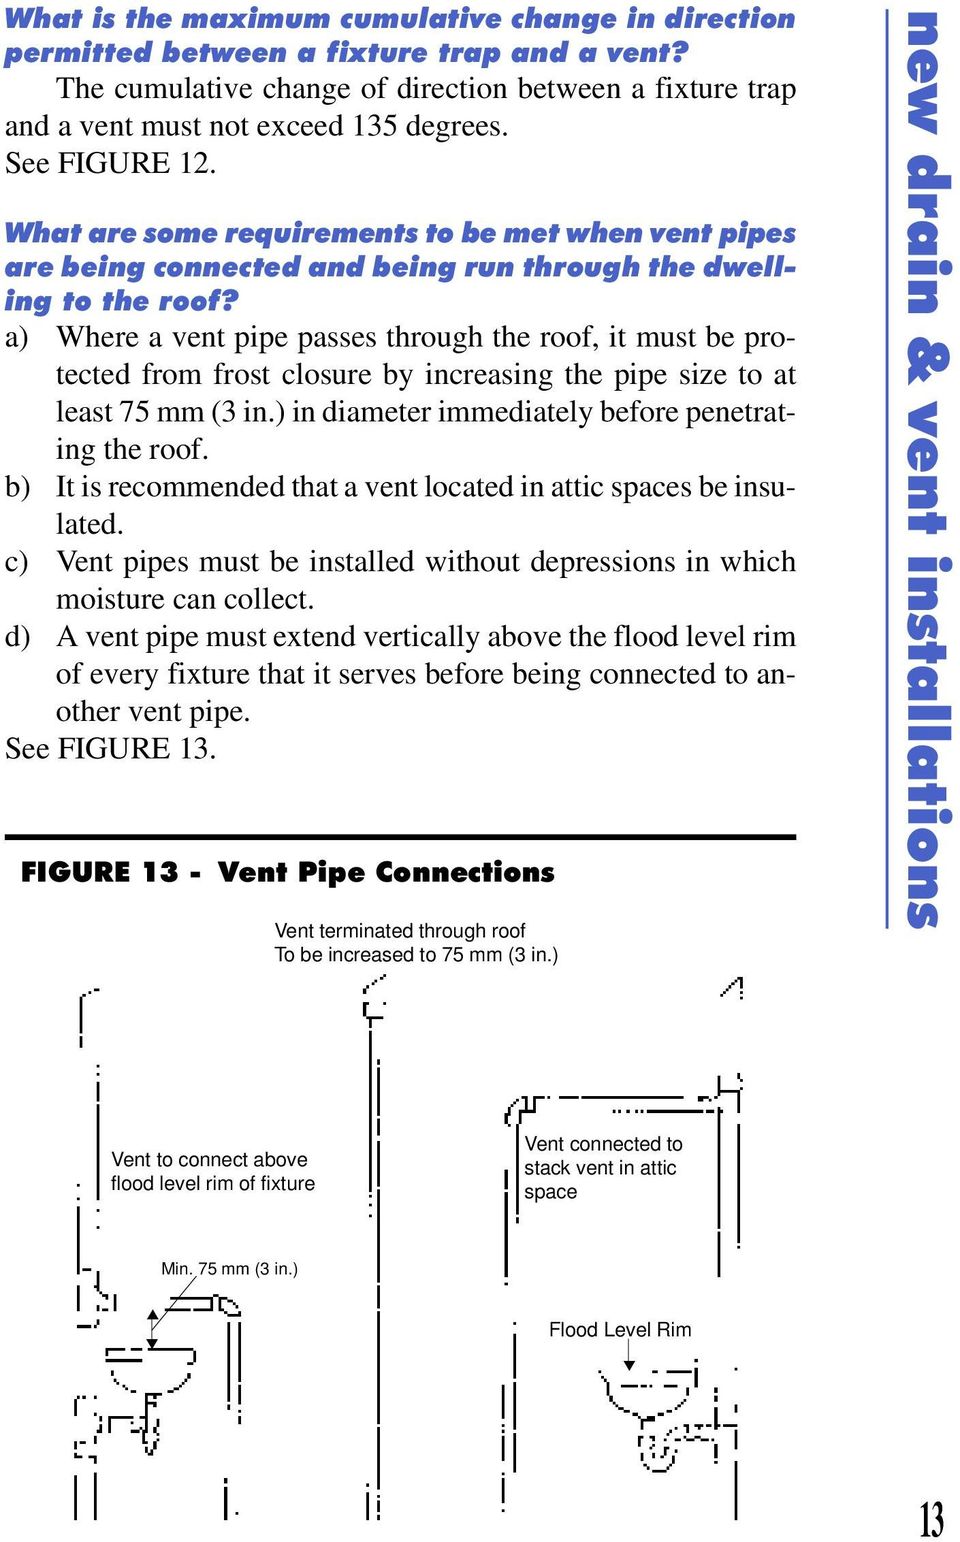 a) Where a vent pipe passes through the roof, it must be protected from frost closure by increasing the pipe size to at least 75 mm () in diameter immediately before penetrating the roof.